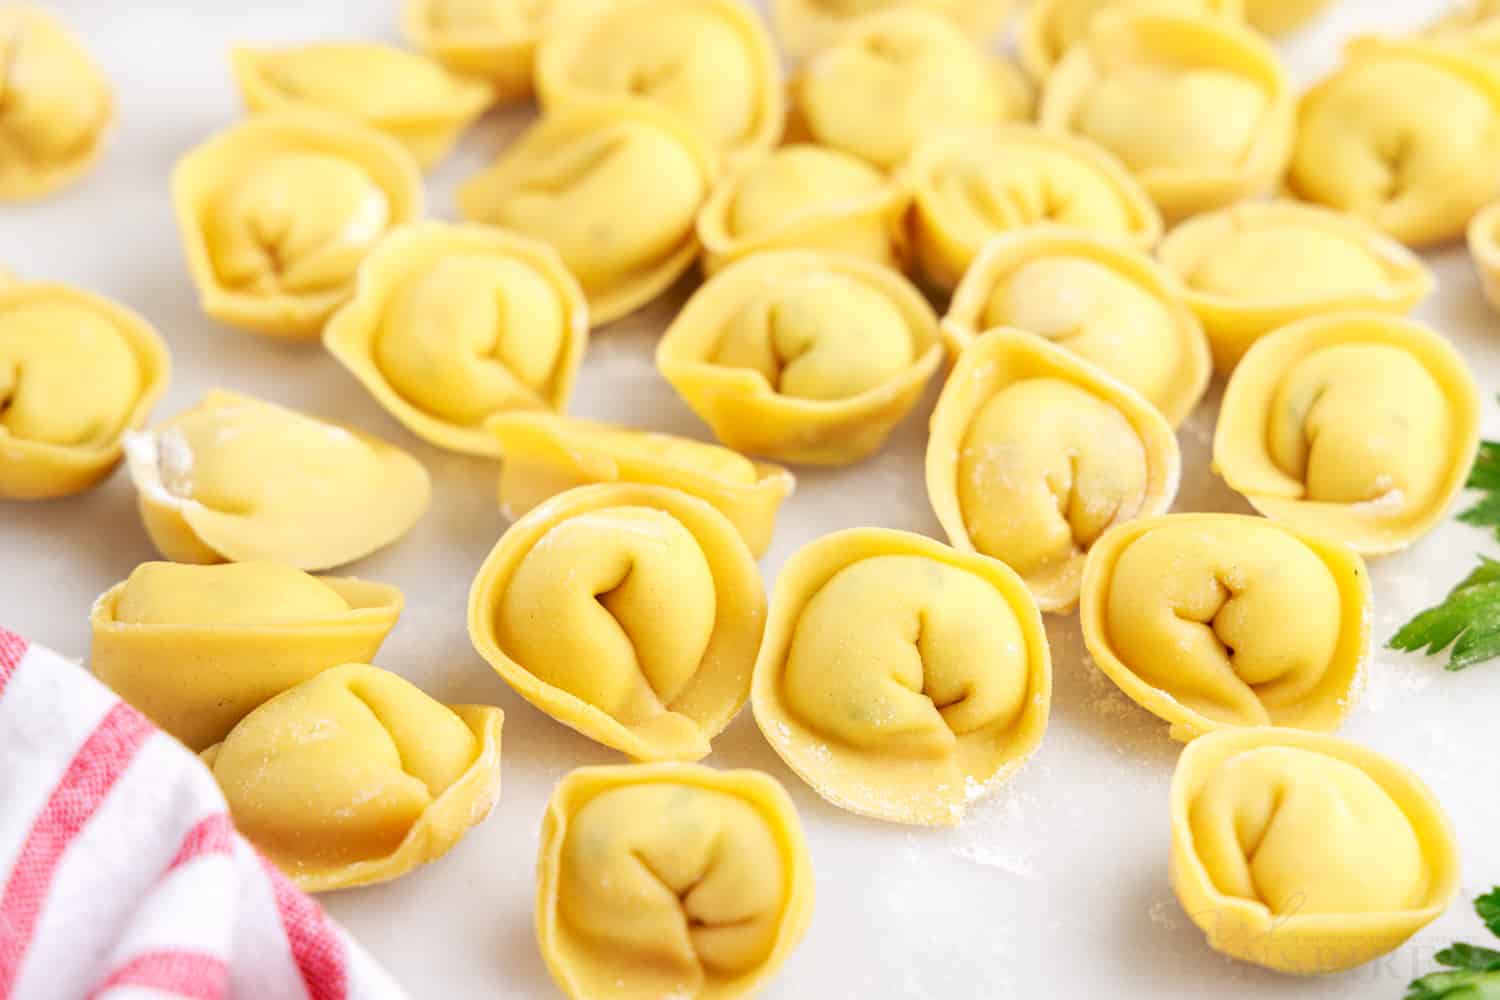 grouping of uncooked tortellinis